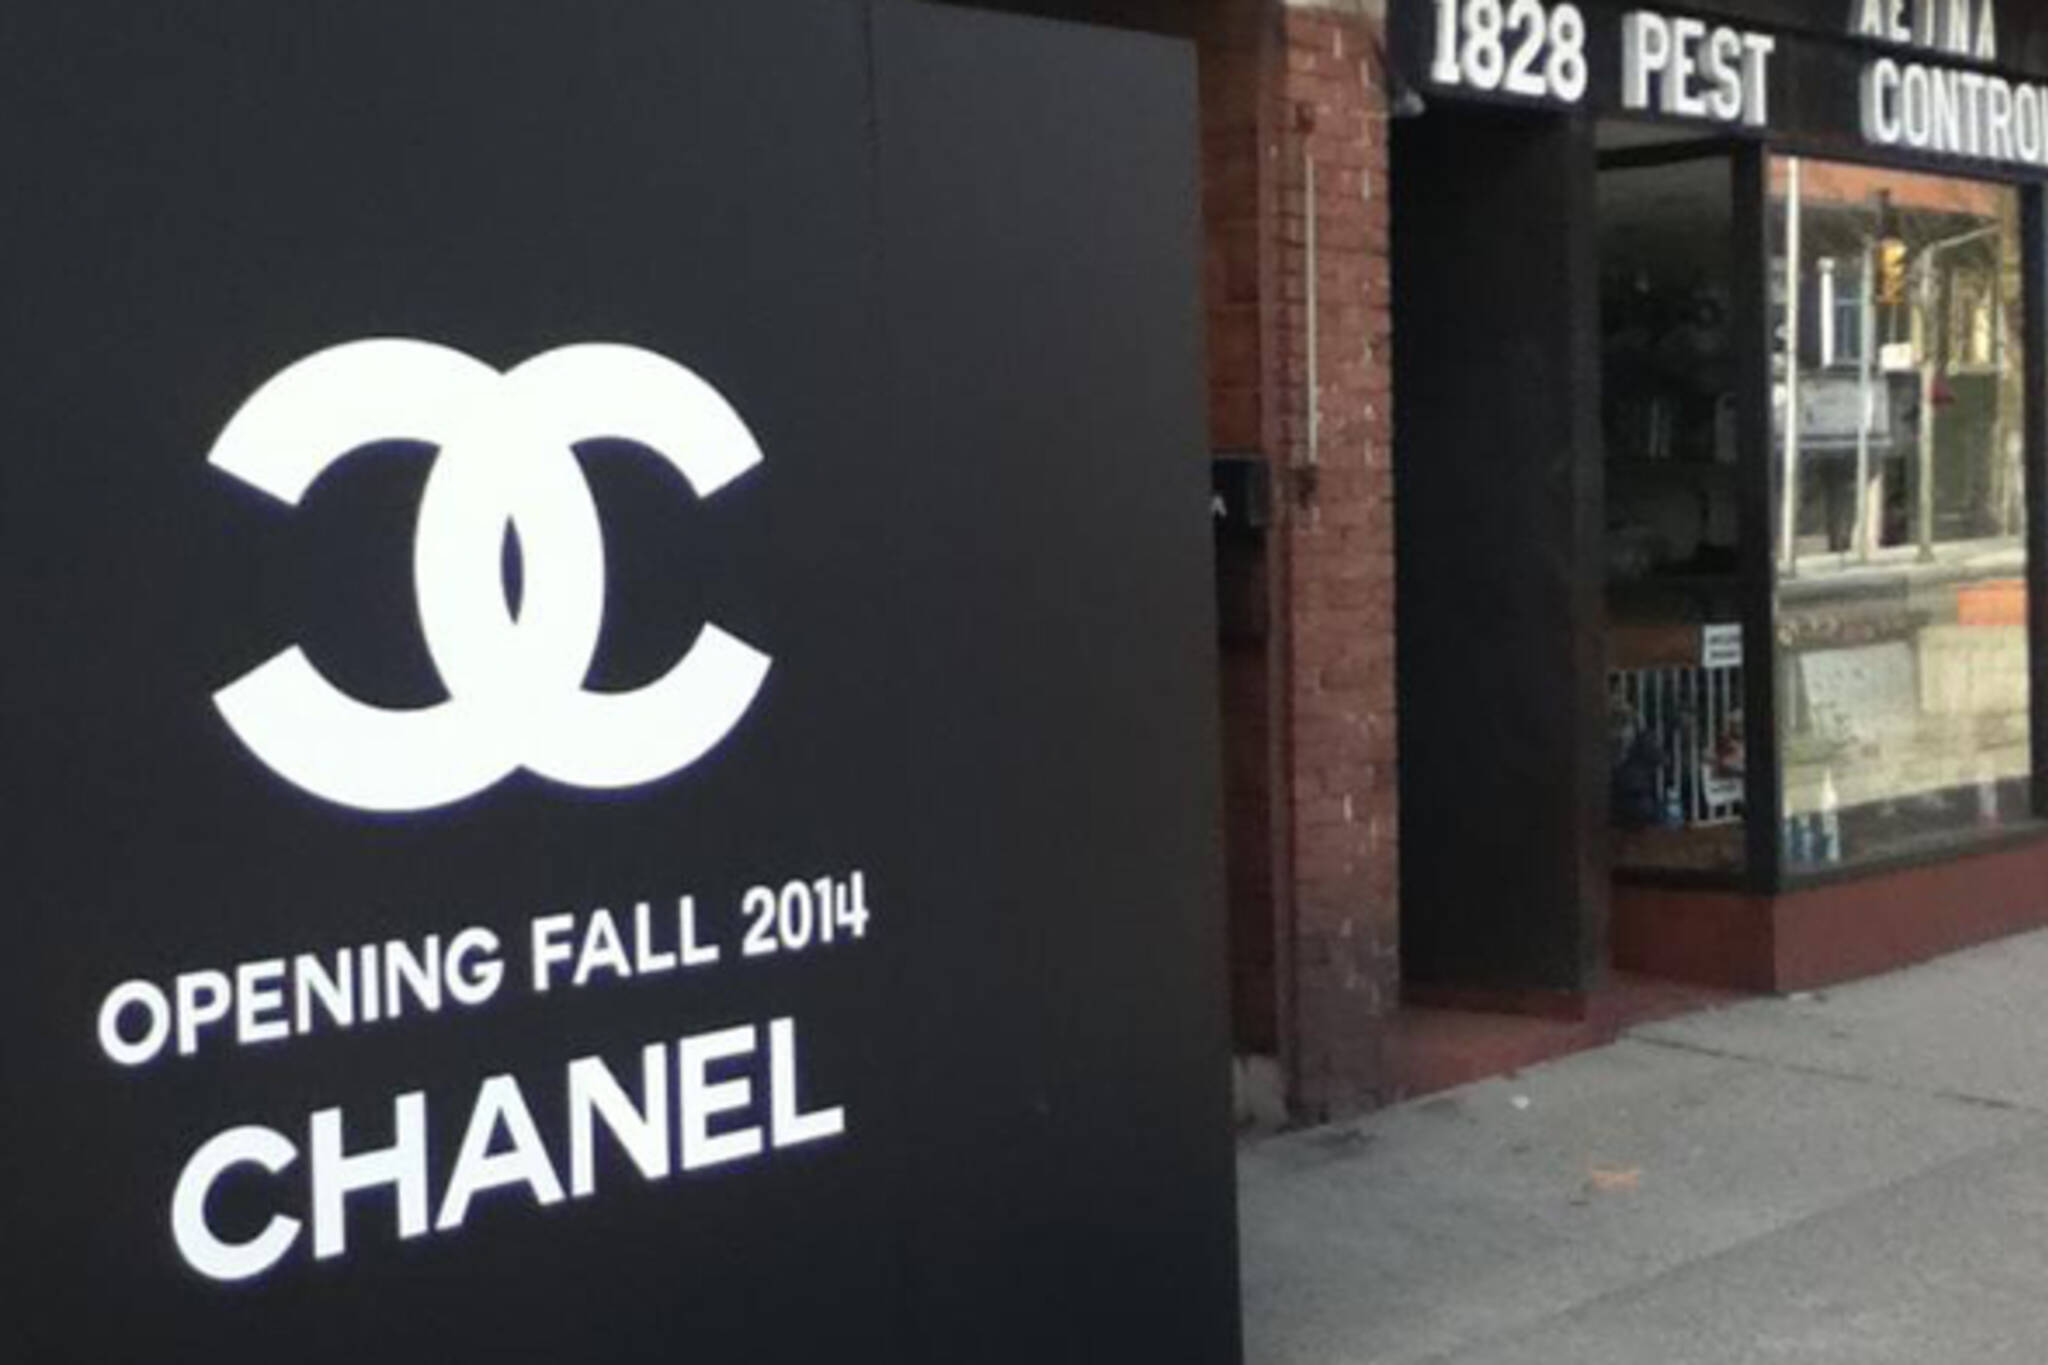 Chanel Cleanup in Aisle 5